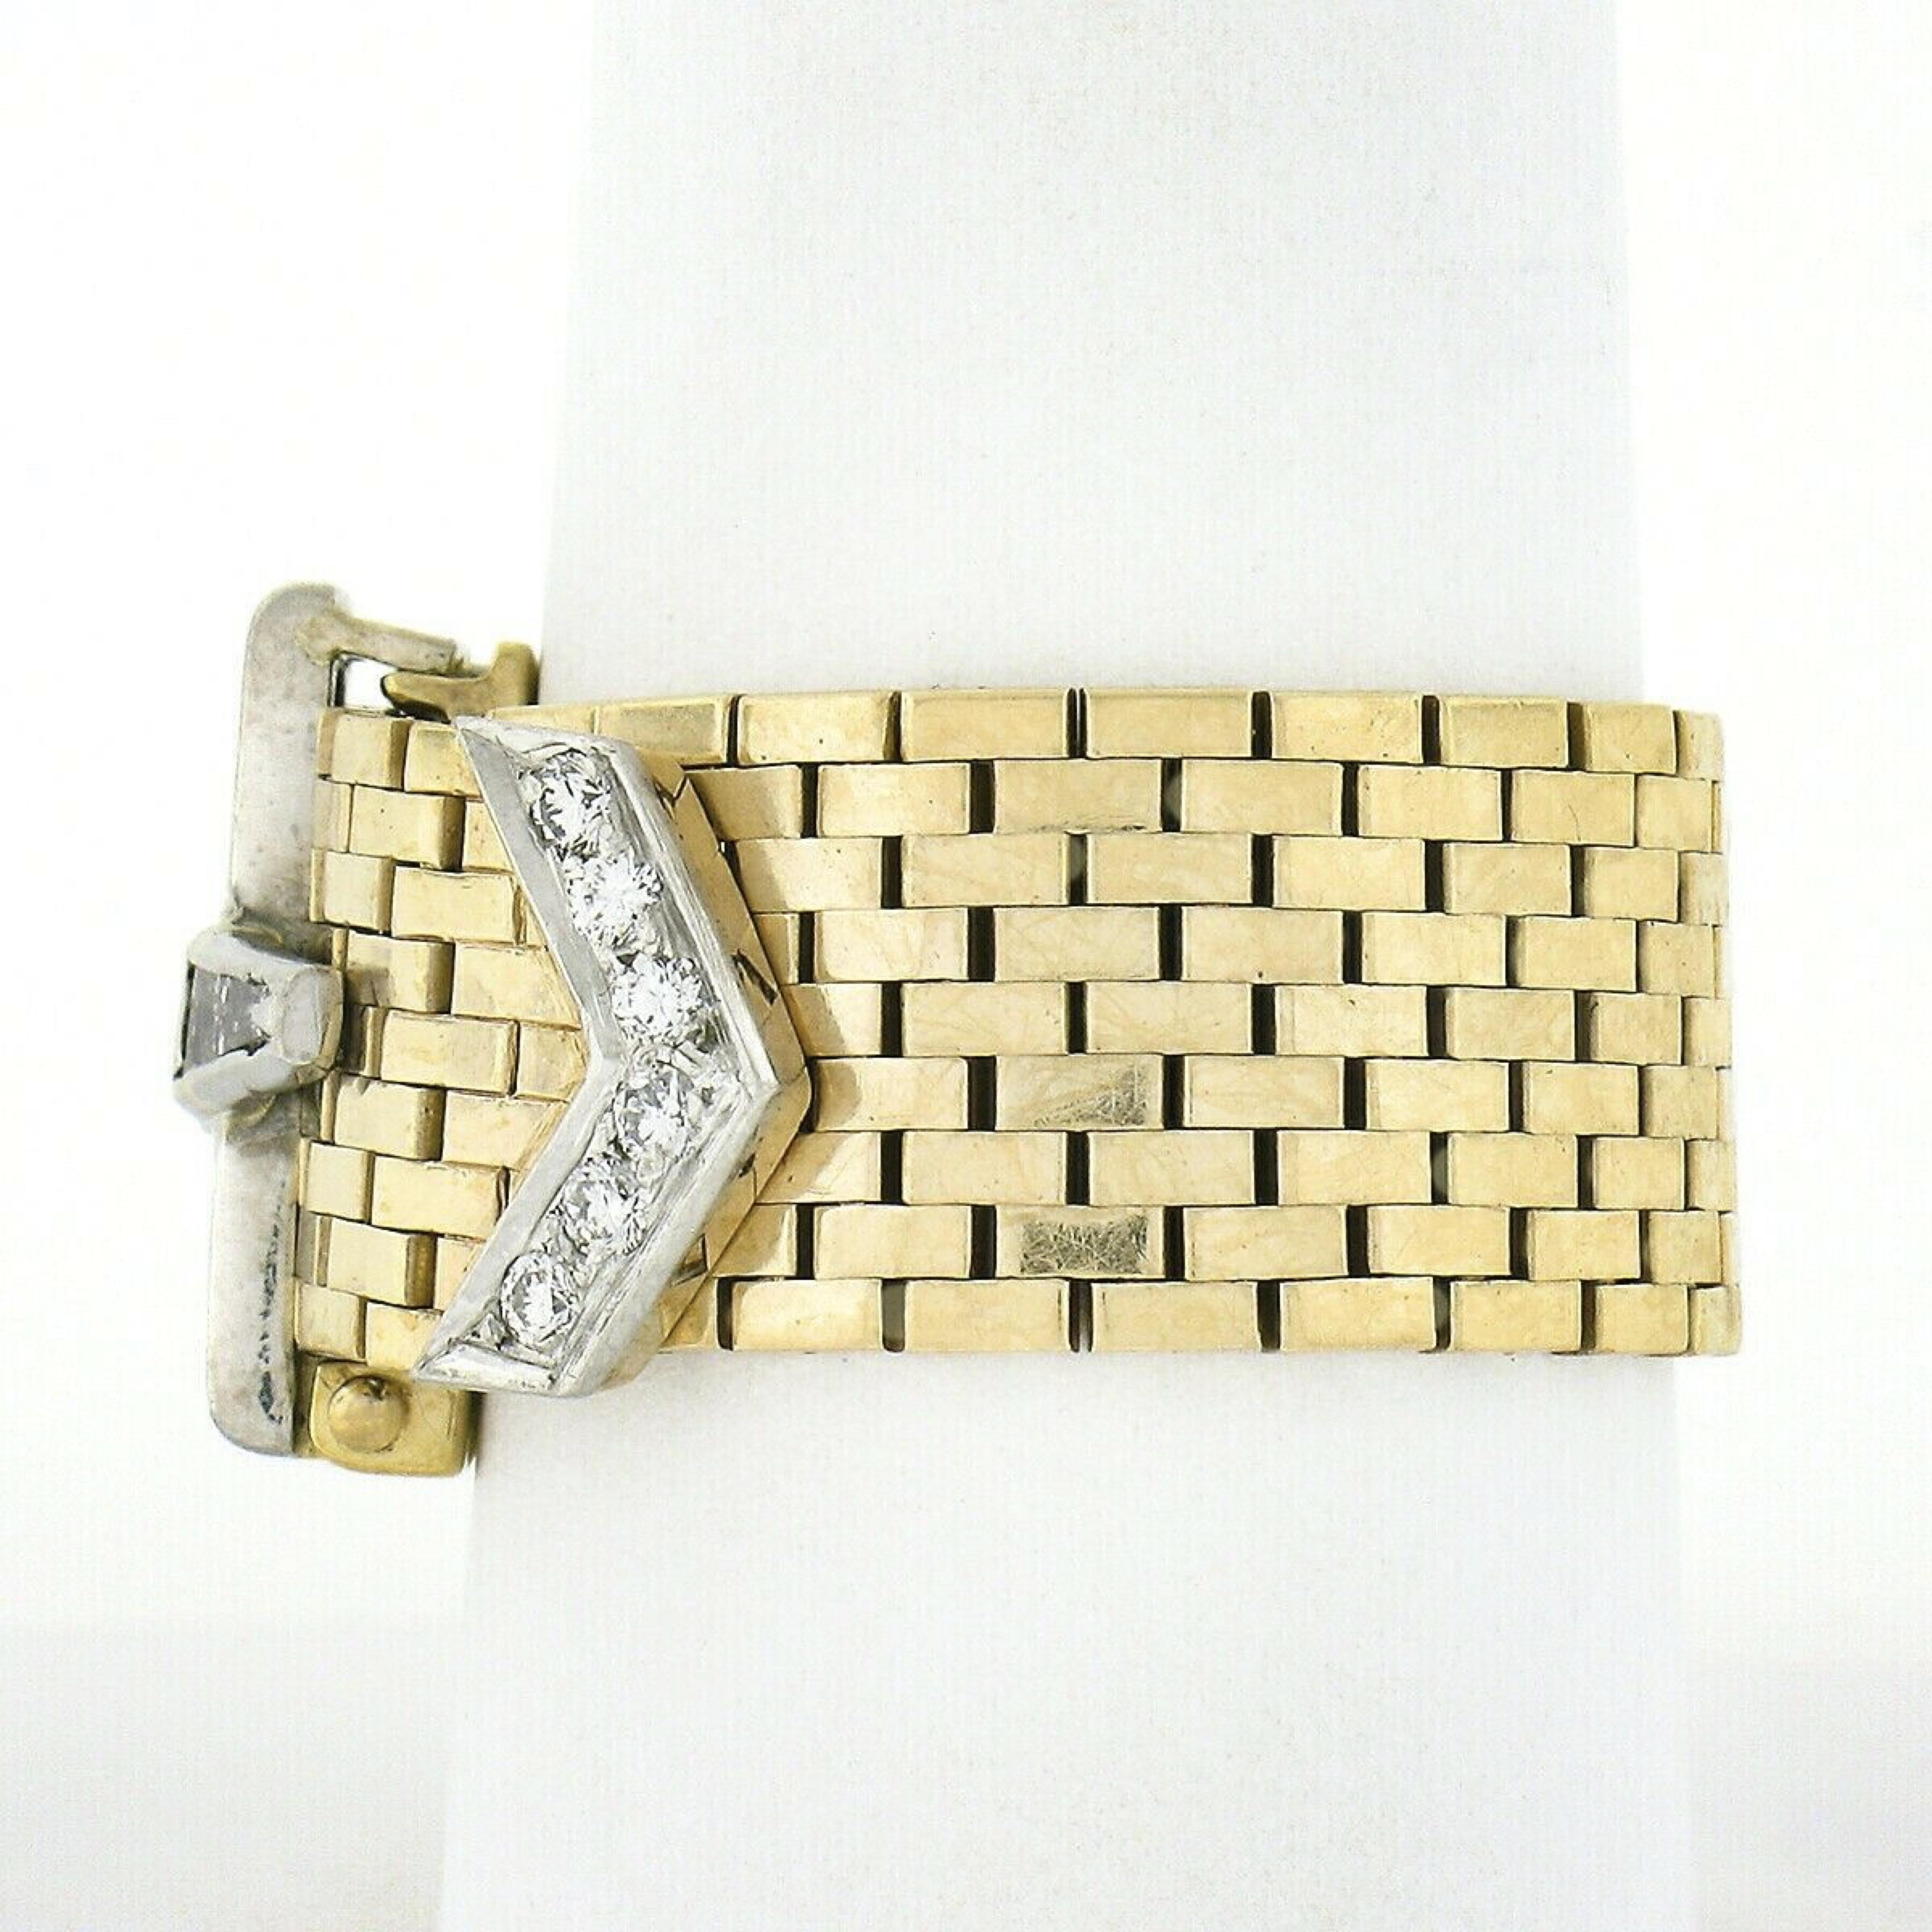 This incredible vintage buckle band ring is crafted from solid 14k yellow gold with solid platinum at the 